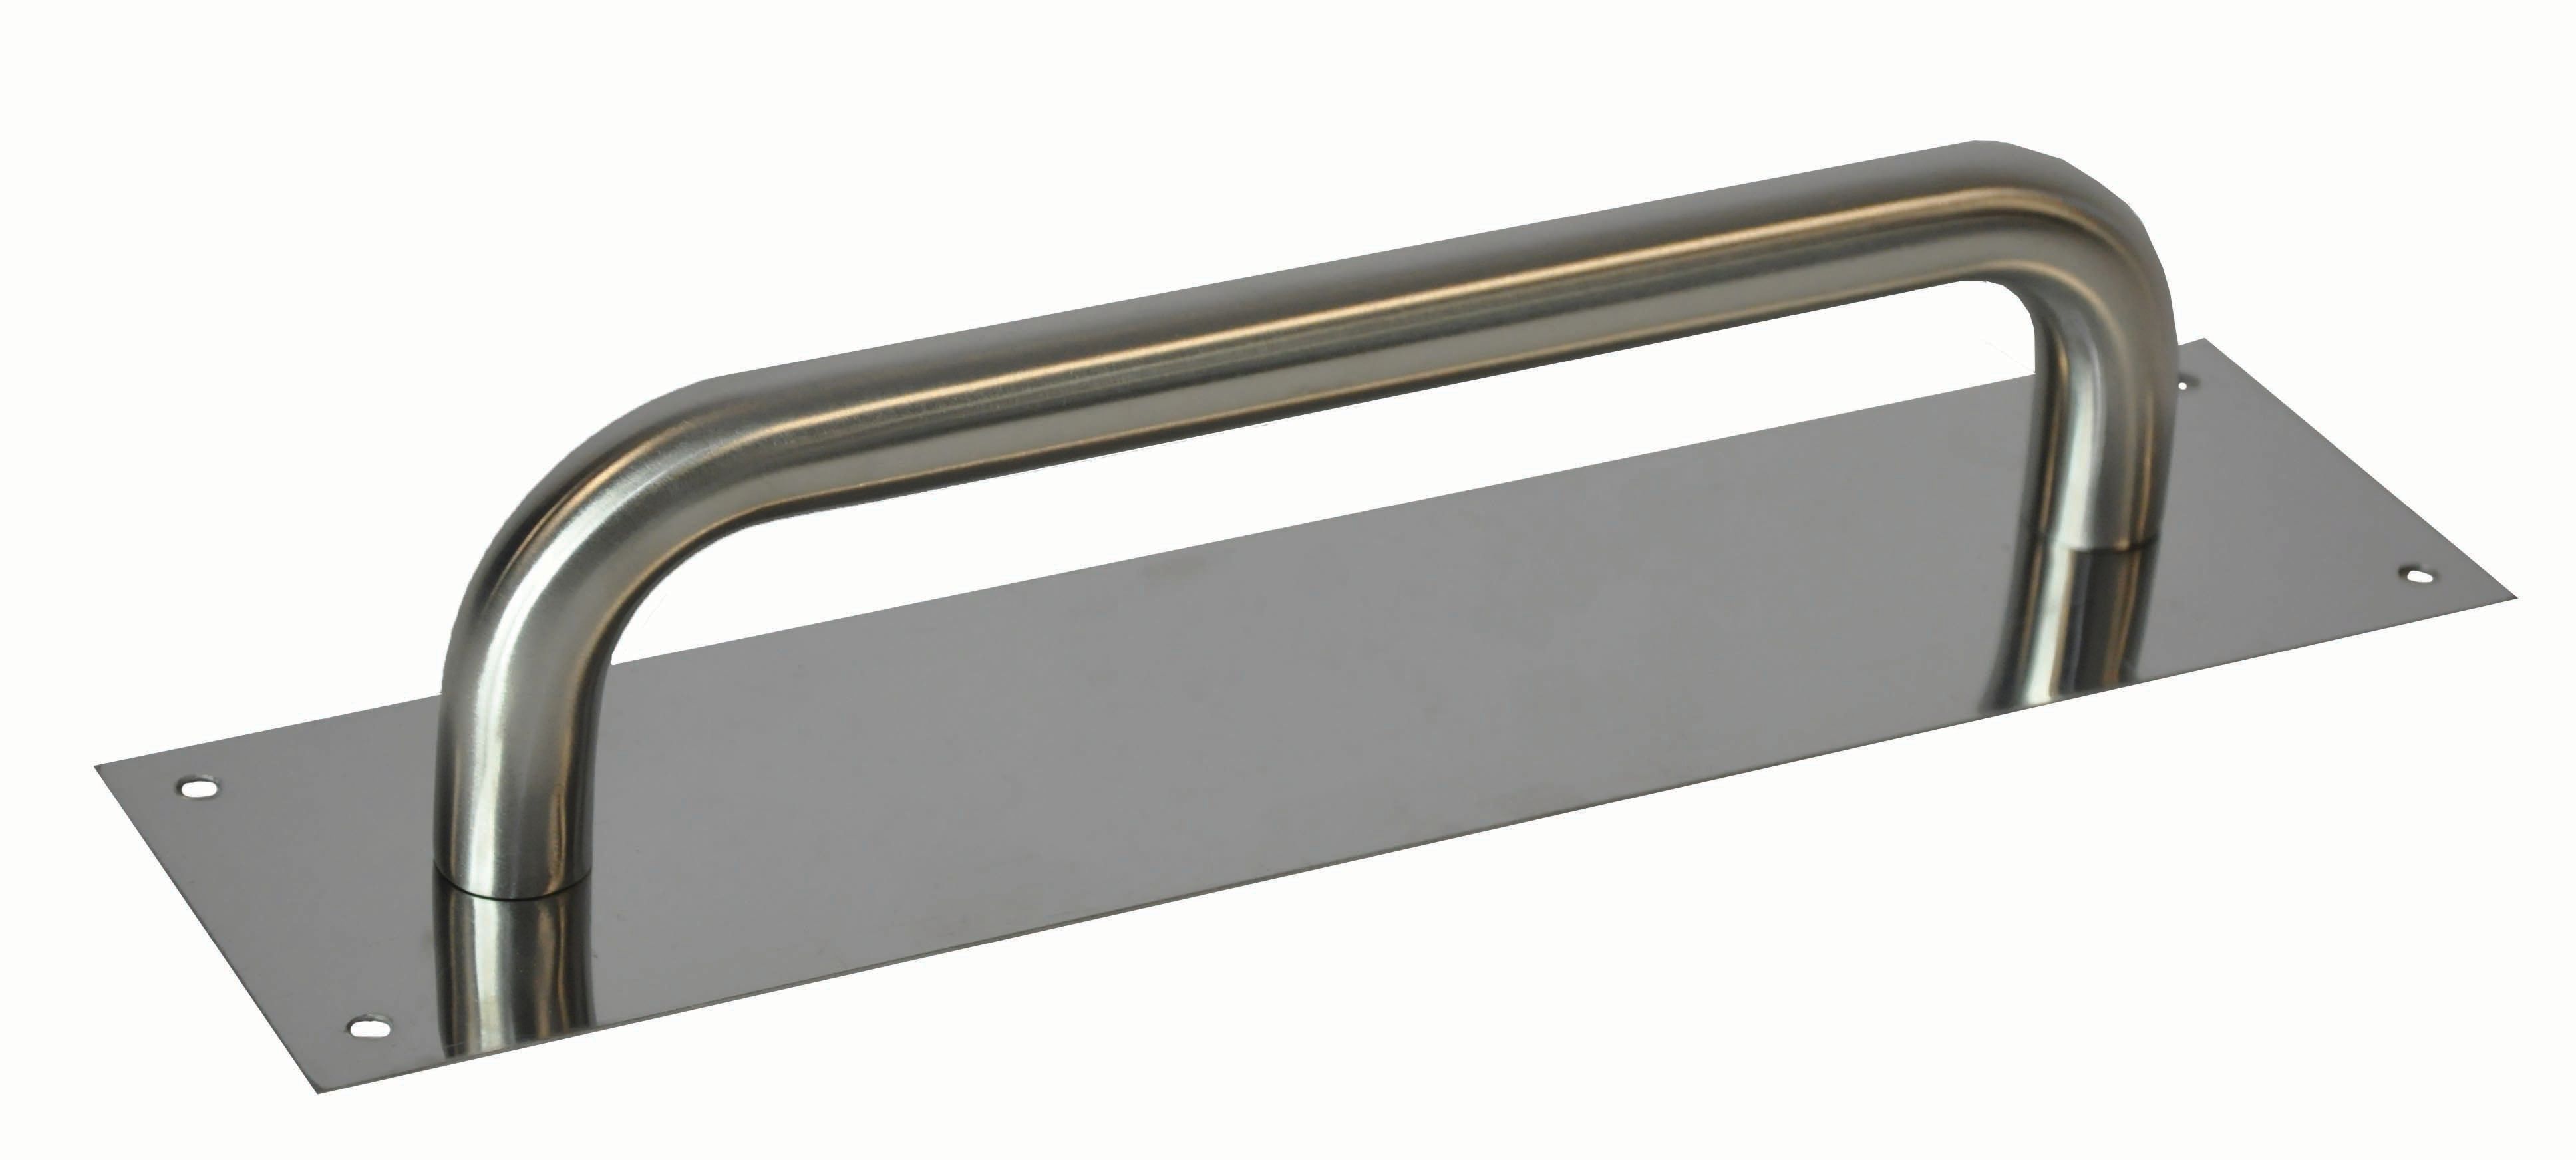 Image of 4FireDoors Pull Handle - Satin Stainless Steel 19mm